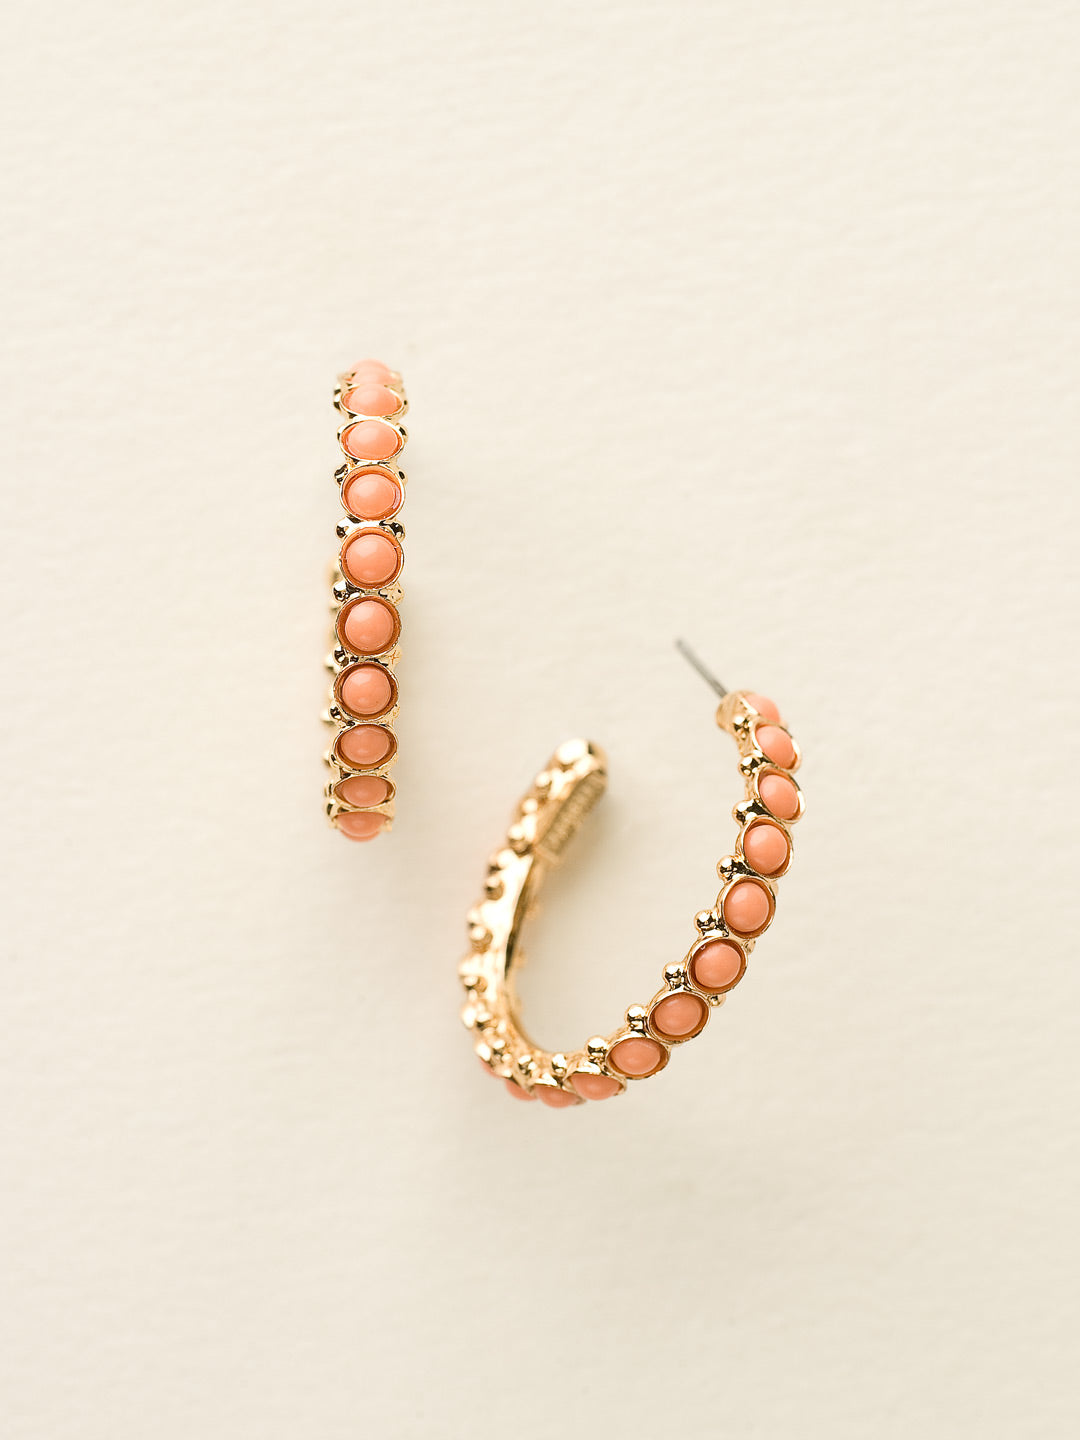 Heavenly Hoop Earrings - ECQ24BGCCO - <p>Gemstones cover the outside of these hoop earrings. Their simple style combined with the sparkle of the jewels makes it the perfect staple piece for your jewelry box. From Sorrelli's Caribbean Coral collection in our Bright Gold-tone finish.</p>